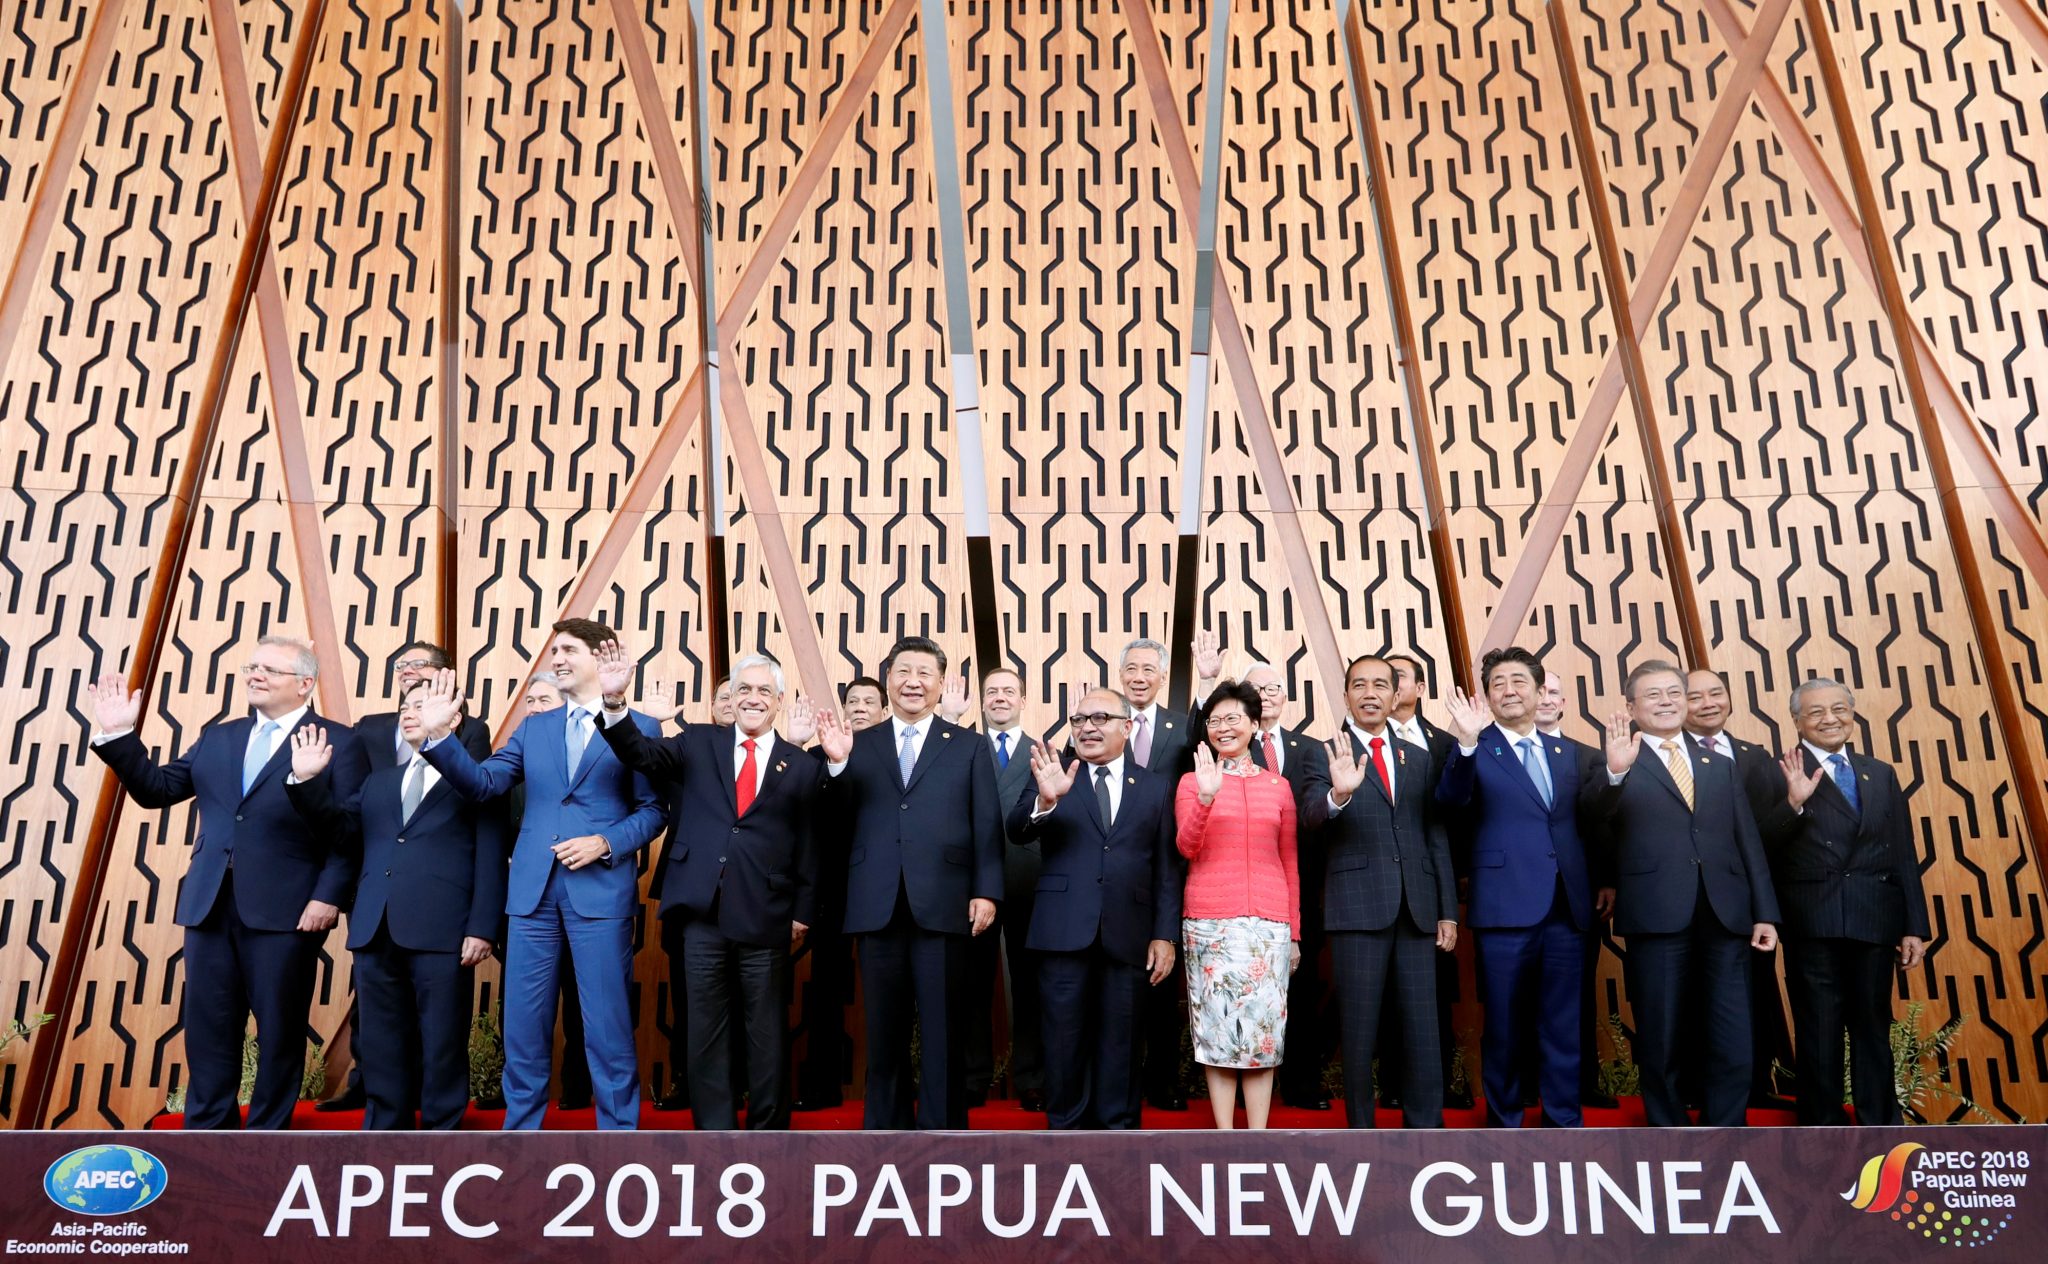 Past, present and future of APEC at 30 East Asia Forum